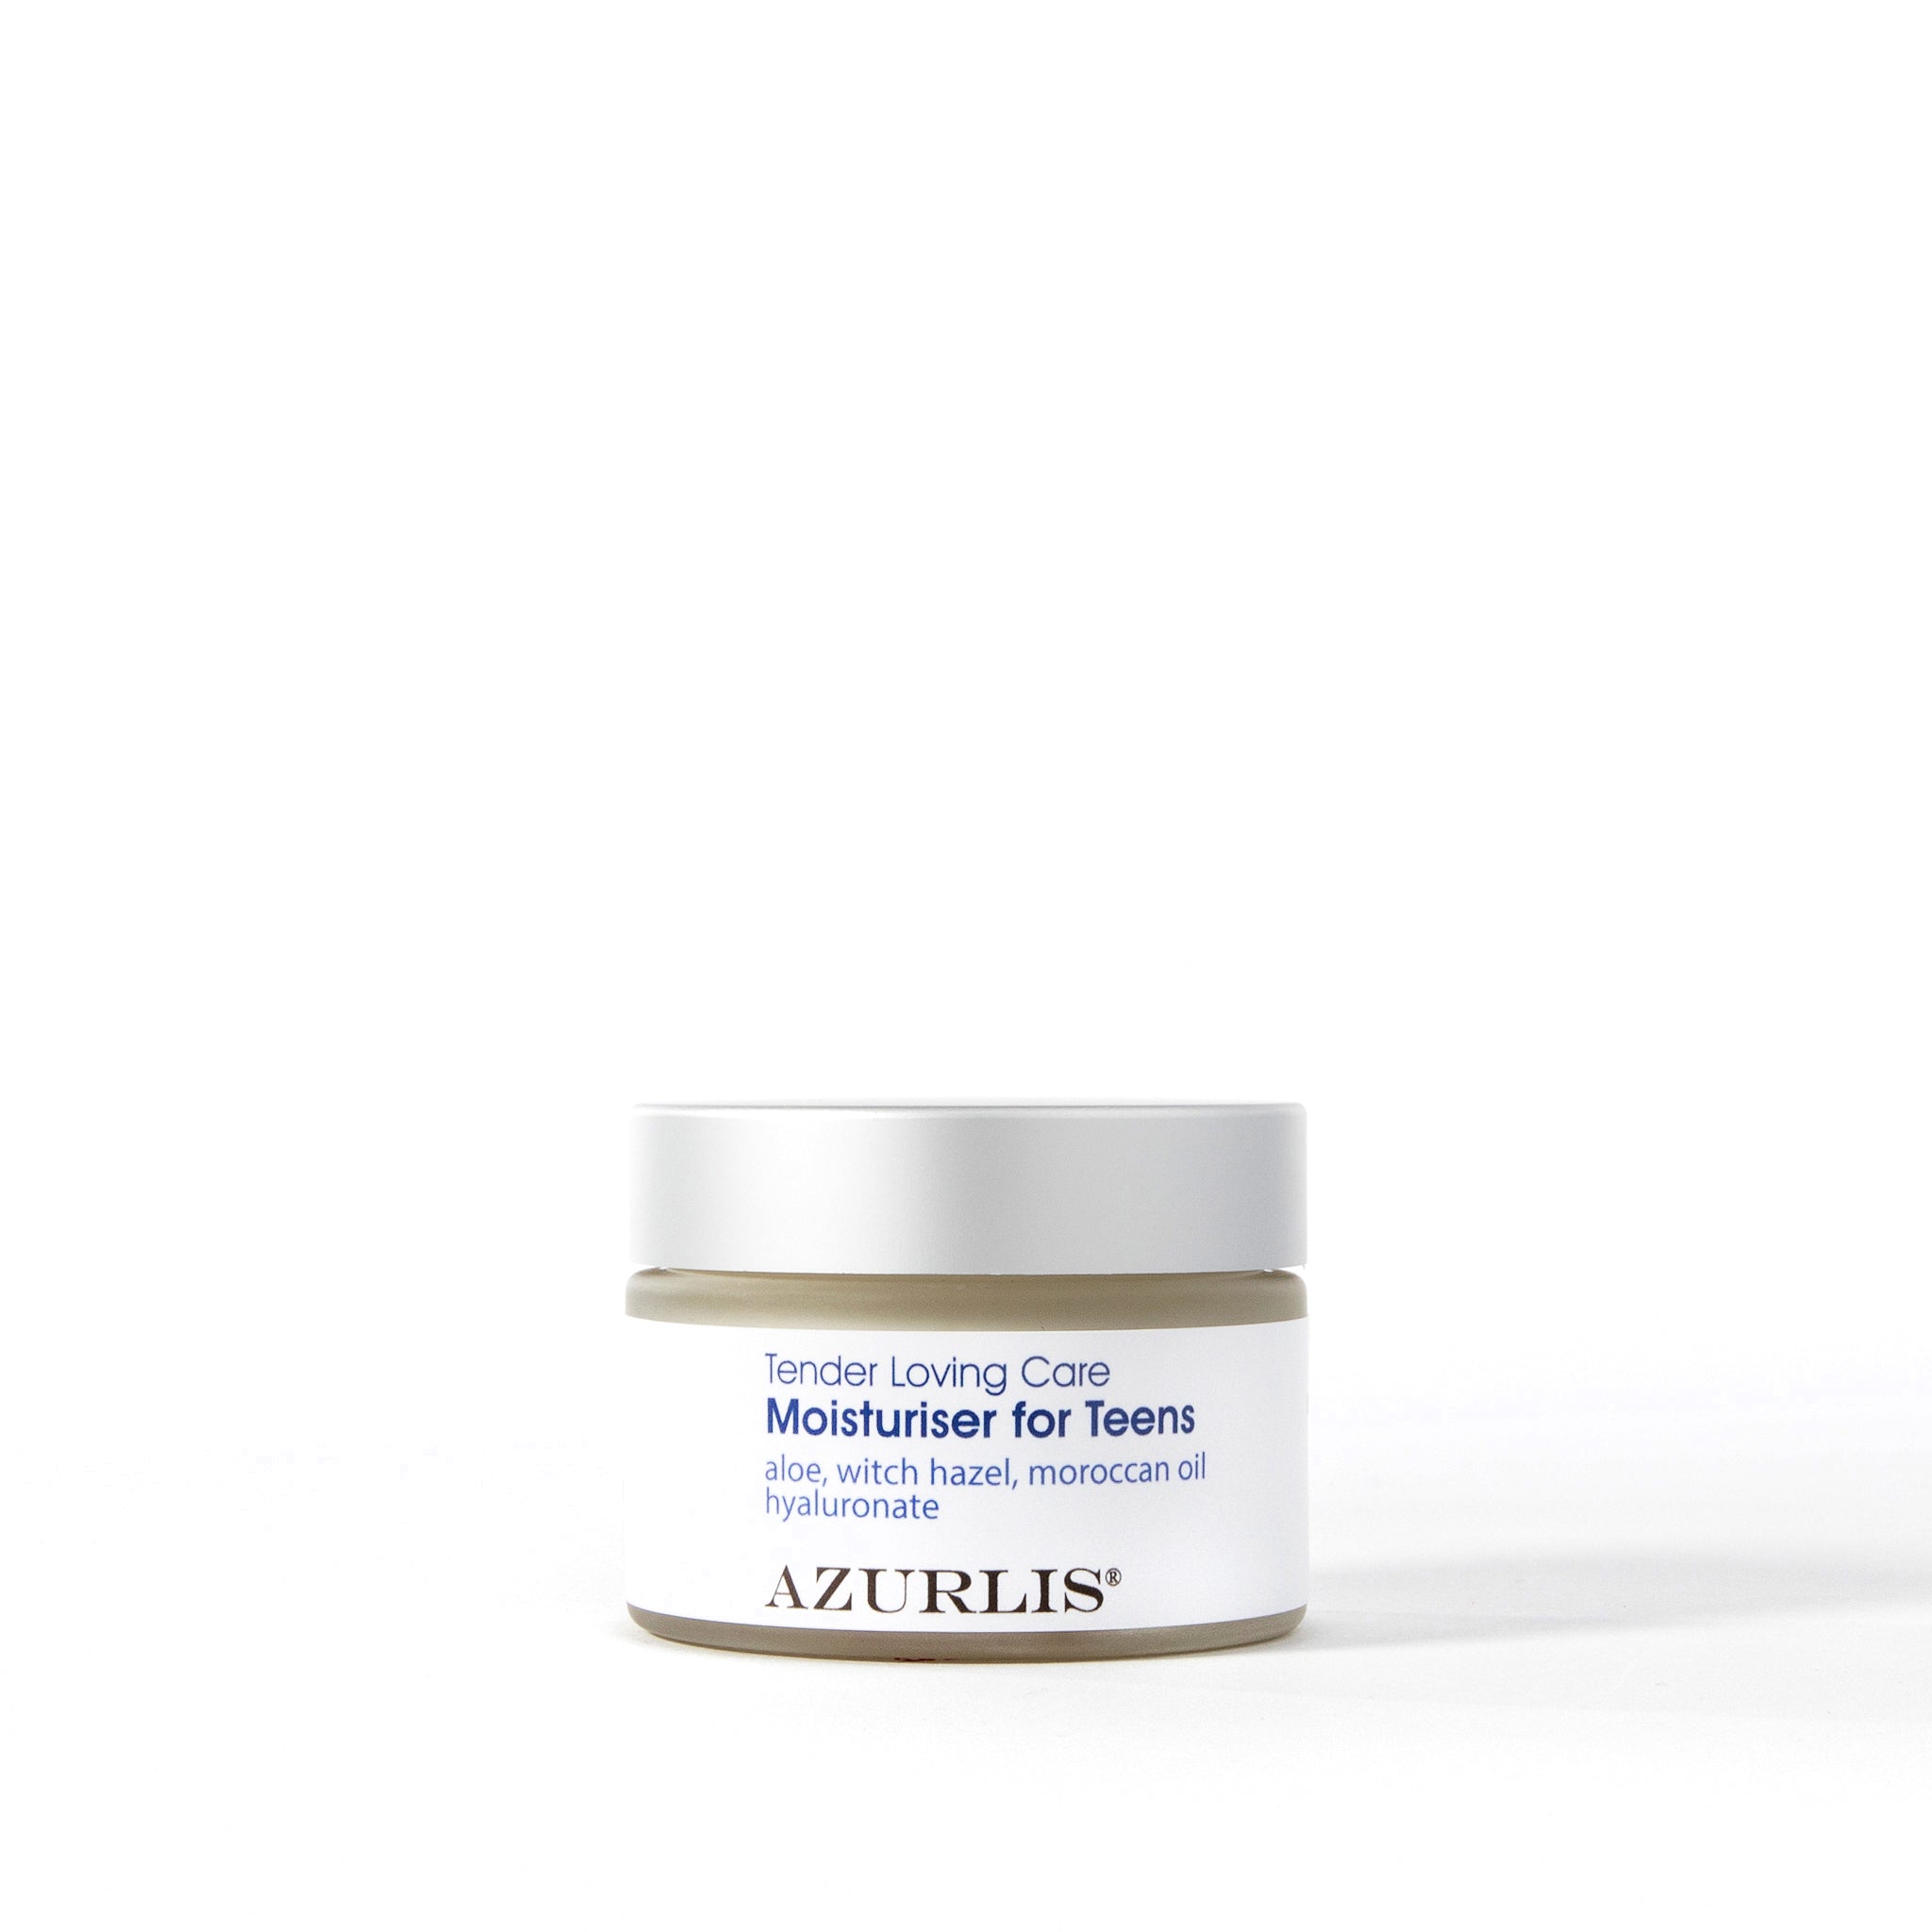 Azurlis™ TLC Moisturiser for Teens 50/30ml is for acne prone skin.  Formulated to nourish and balance teenage skin, helping to regulate sebaceous gland activity and control bacterial flora. SPF8.